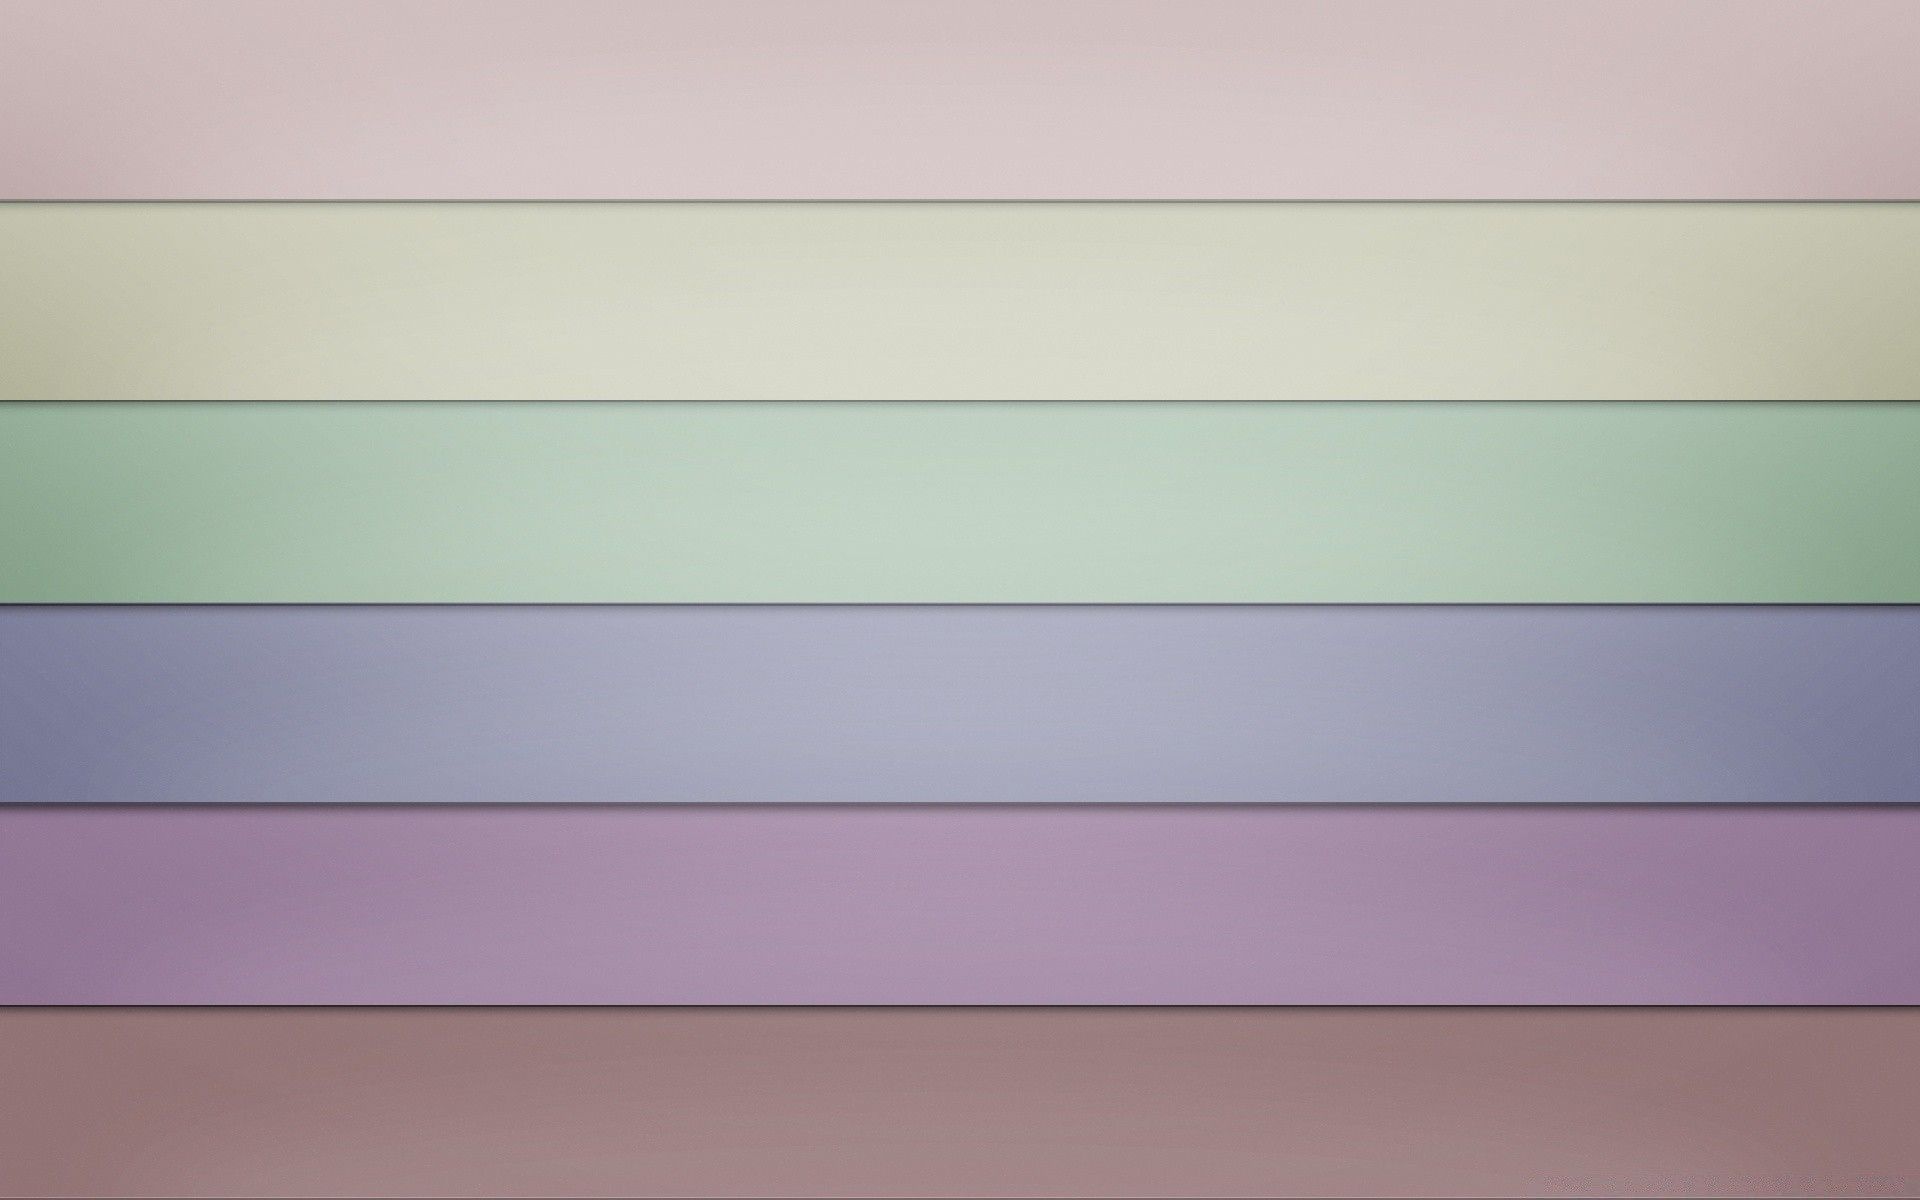 Android wallpapers, Soft color scheme, Gentle and soothing, Pastel color palette, 1920x1200 HD Desktop